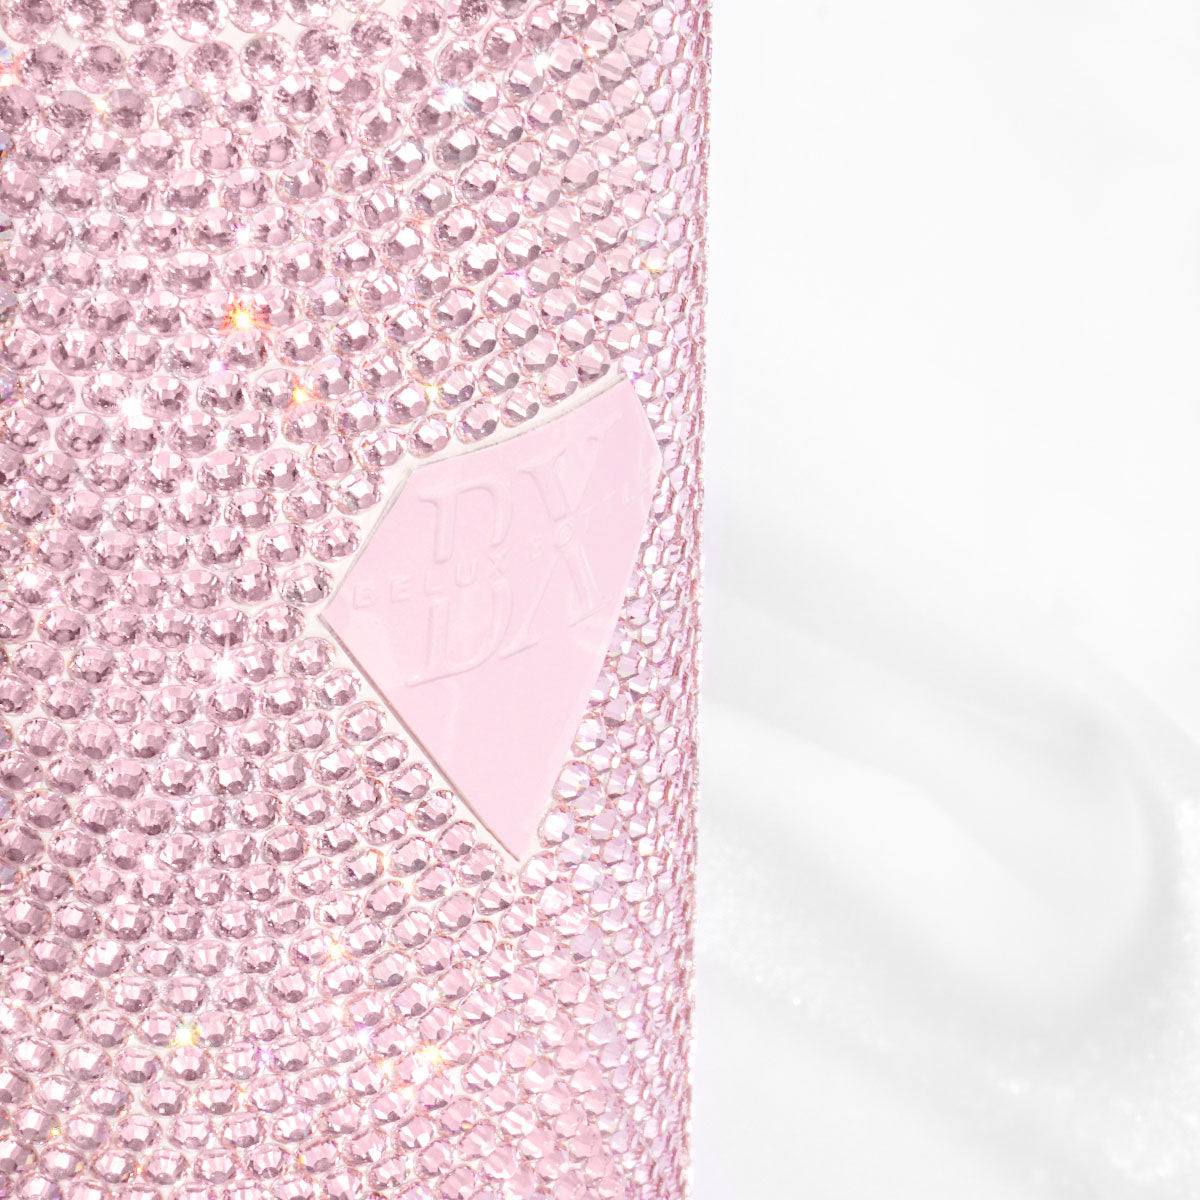 Close-up of Pink Bling Rhinestone Water Bottle with Hundreds of Sparkling Rhinestones, Featuring Belux Bottle's Diamond-shaped Logo